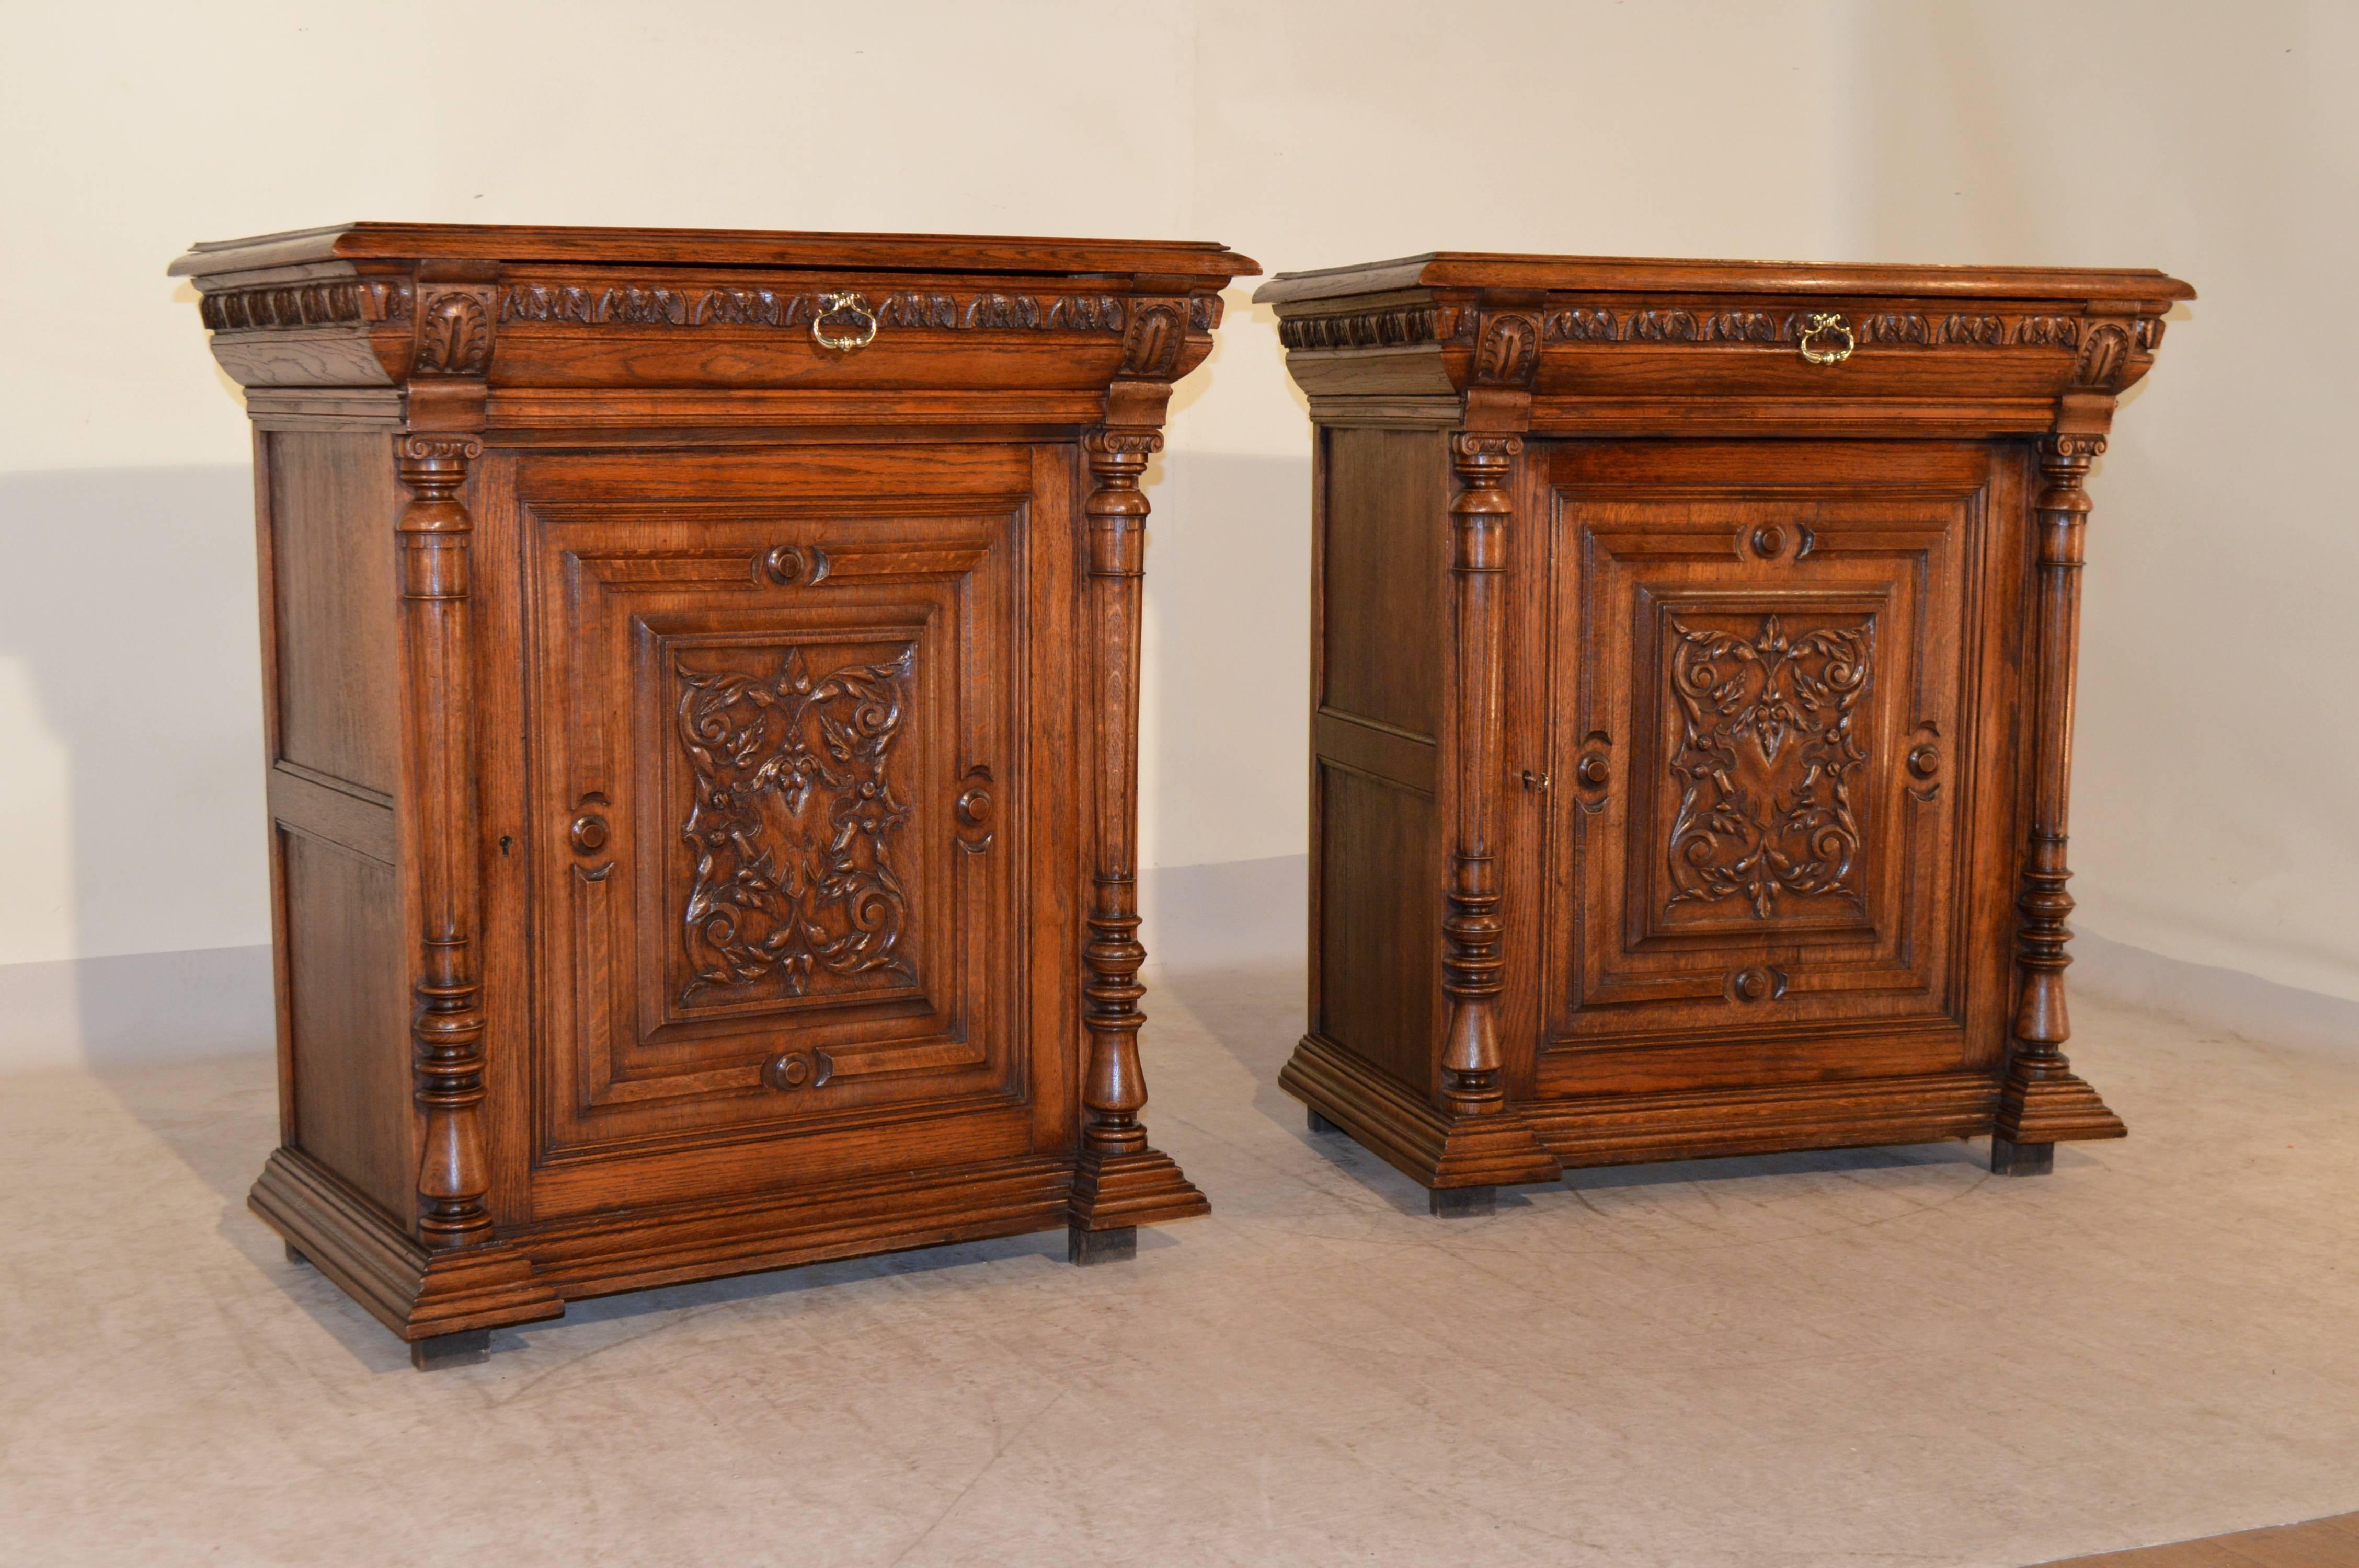 Pair of 19th century French oak cabinets with beveled edges around the tops, following down to a single molded drawer over a raised paneled and carved single door, which opens to reveal storage. The door is flanked by turned columns, and the case is